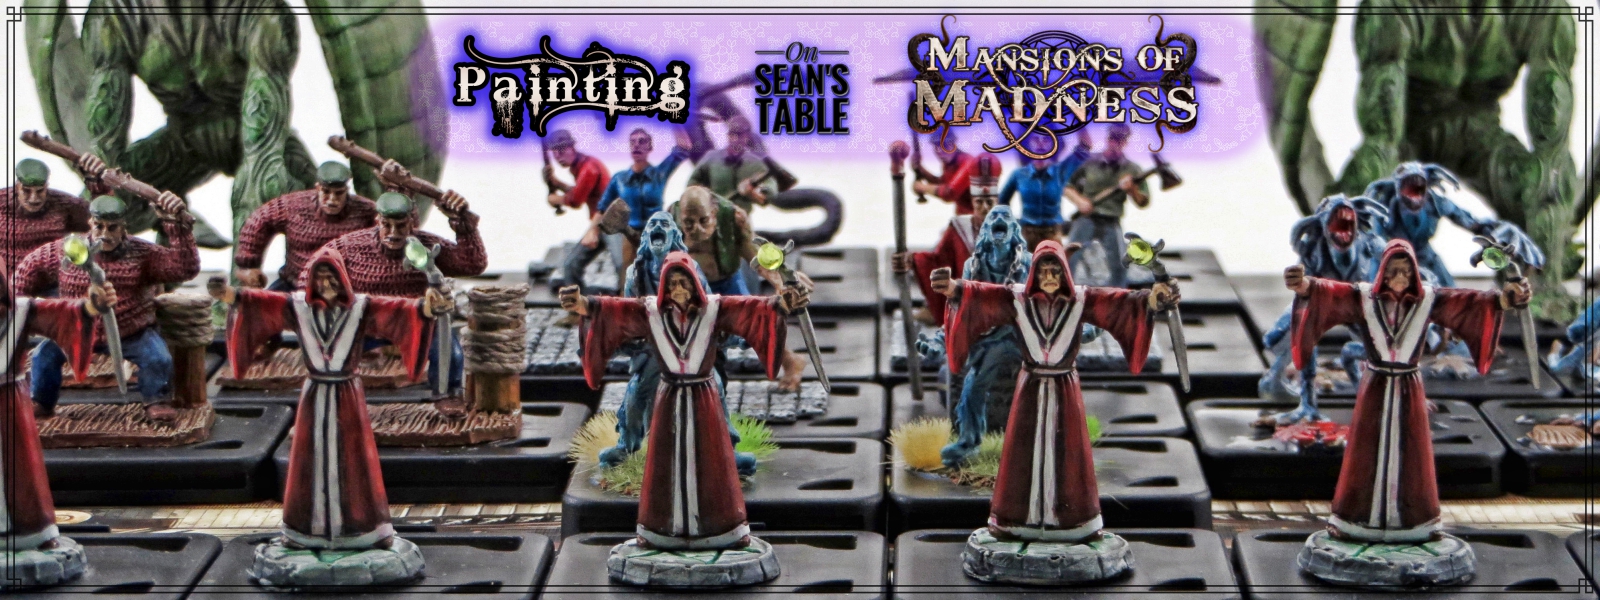 Mansion Madness Painted Figures Feature Image